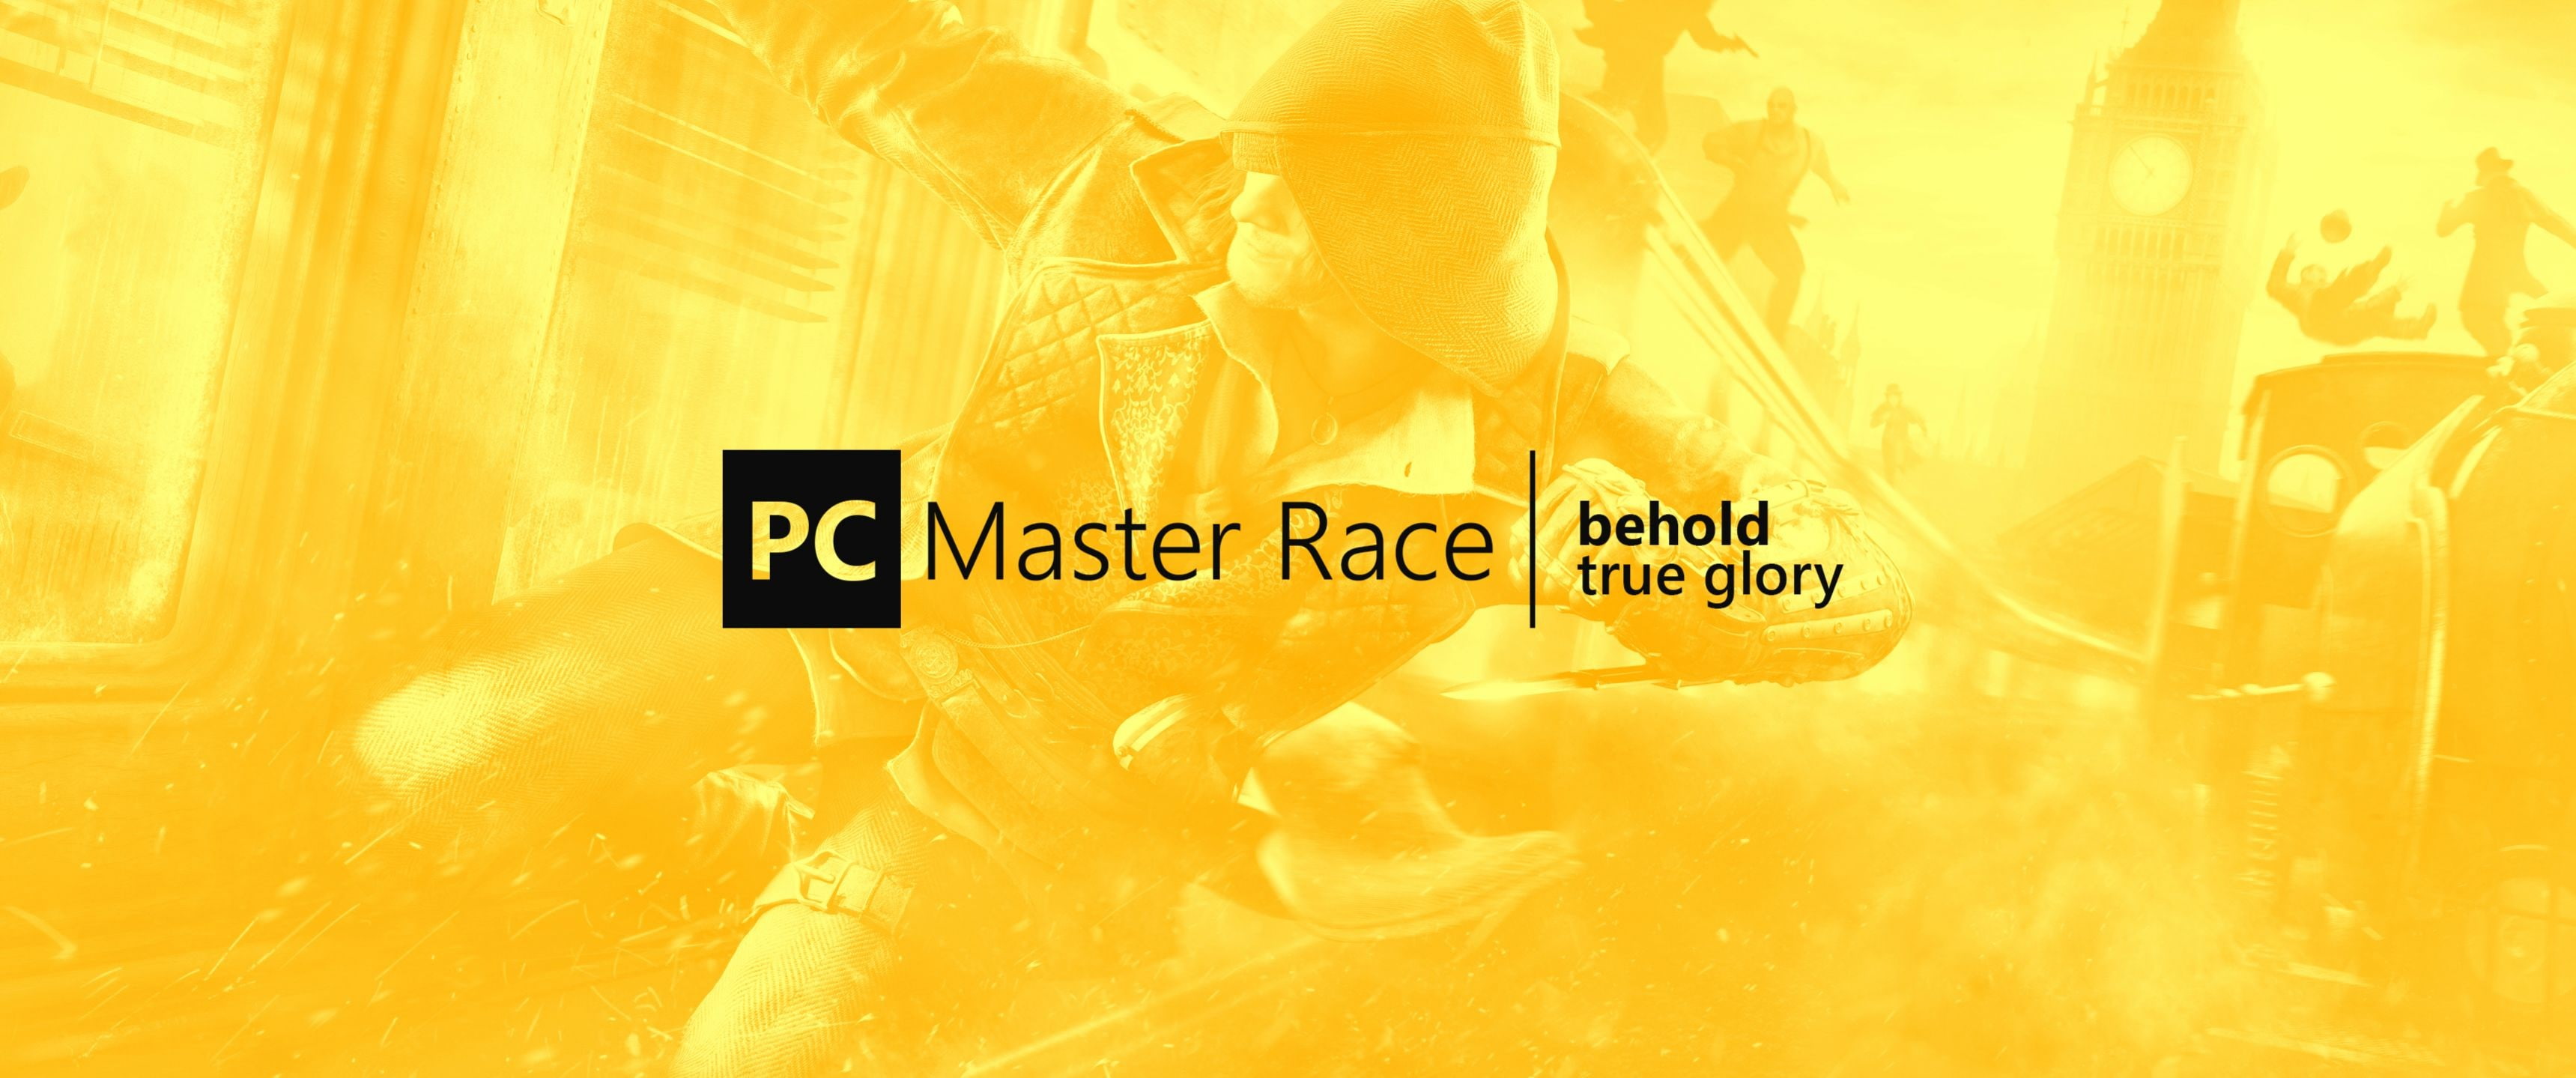 PC Master  Race, PC gaming, Assassin's Creed Syndicate, yellow